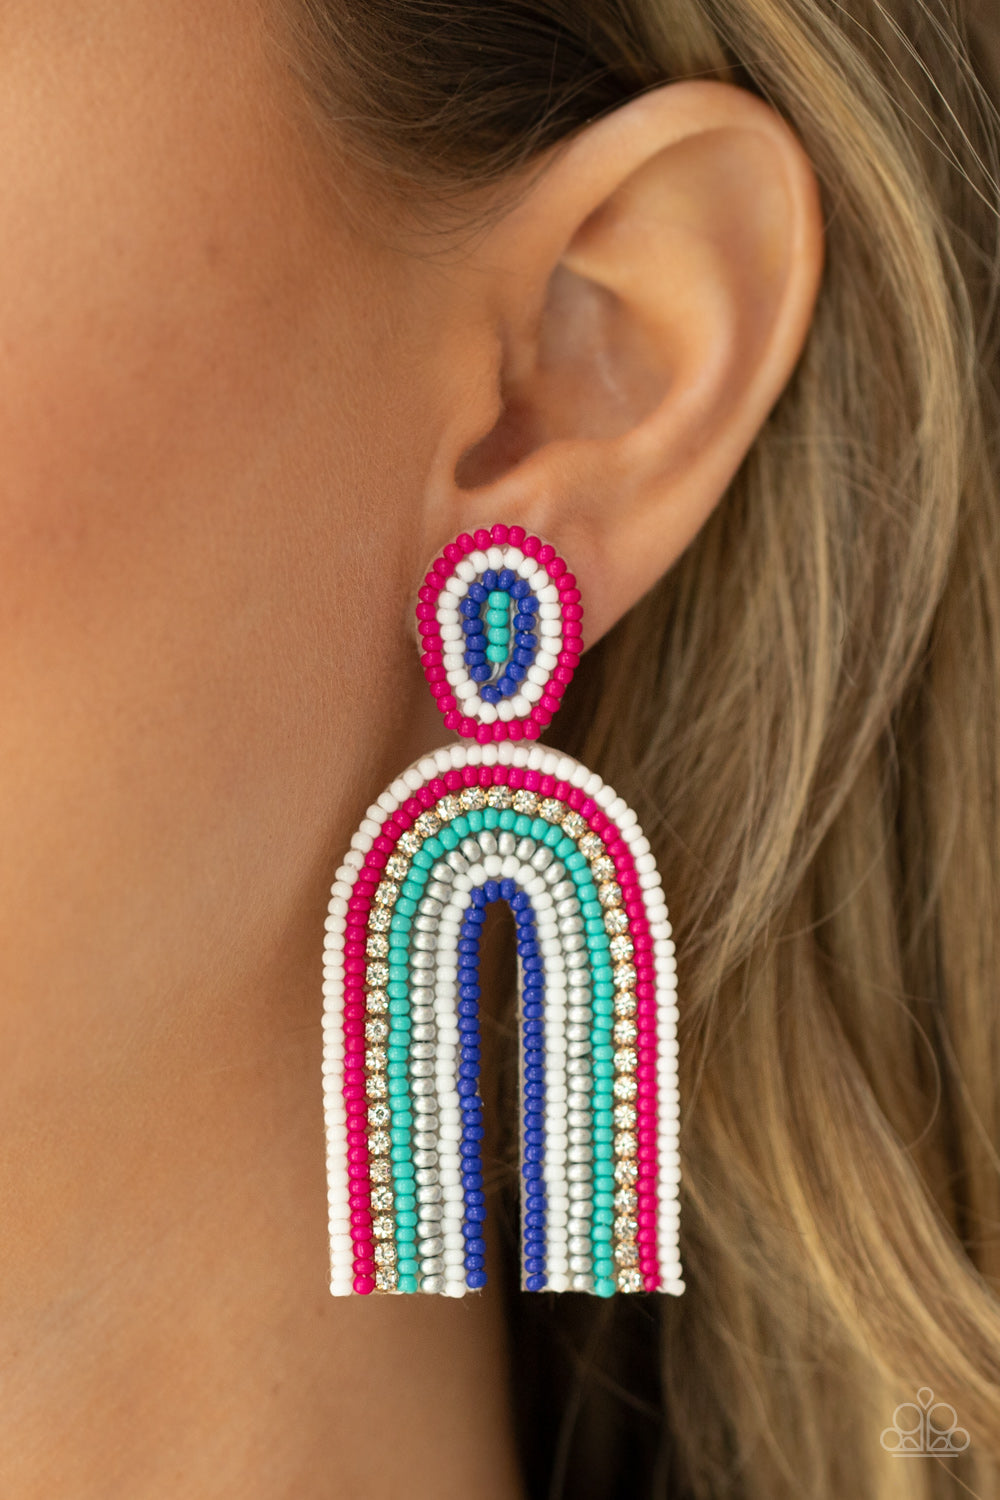 Rainbow Remedy Multi Seedbead Earrings - Paparazzi Jewelry infused with a single row of glassy white rhinestones, dainty strands of white, pink, turquoise, silver, and blue seed beads stack into a colorful rainbow at the bottom of a matching seed beaded fitting. Earring attaches to a standard post fitting.